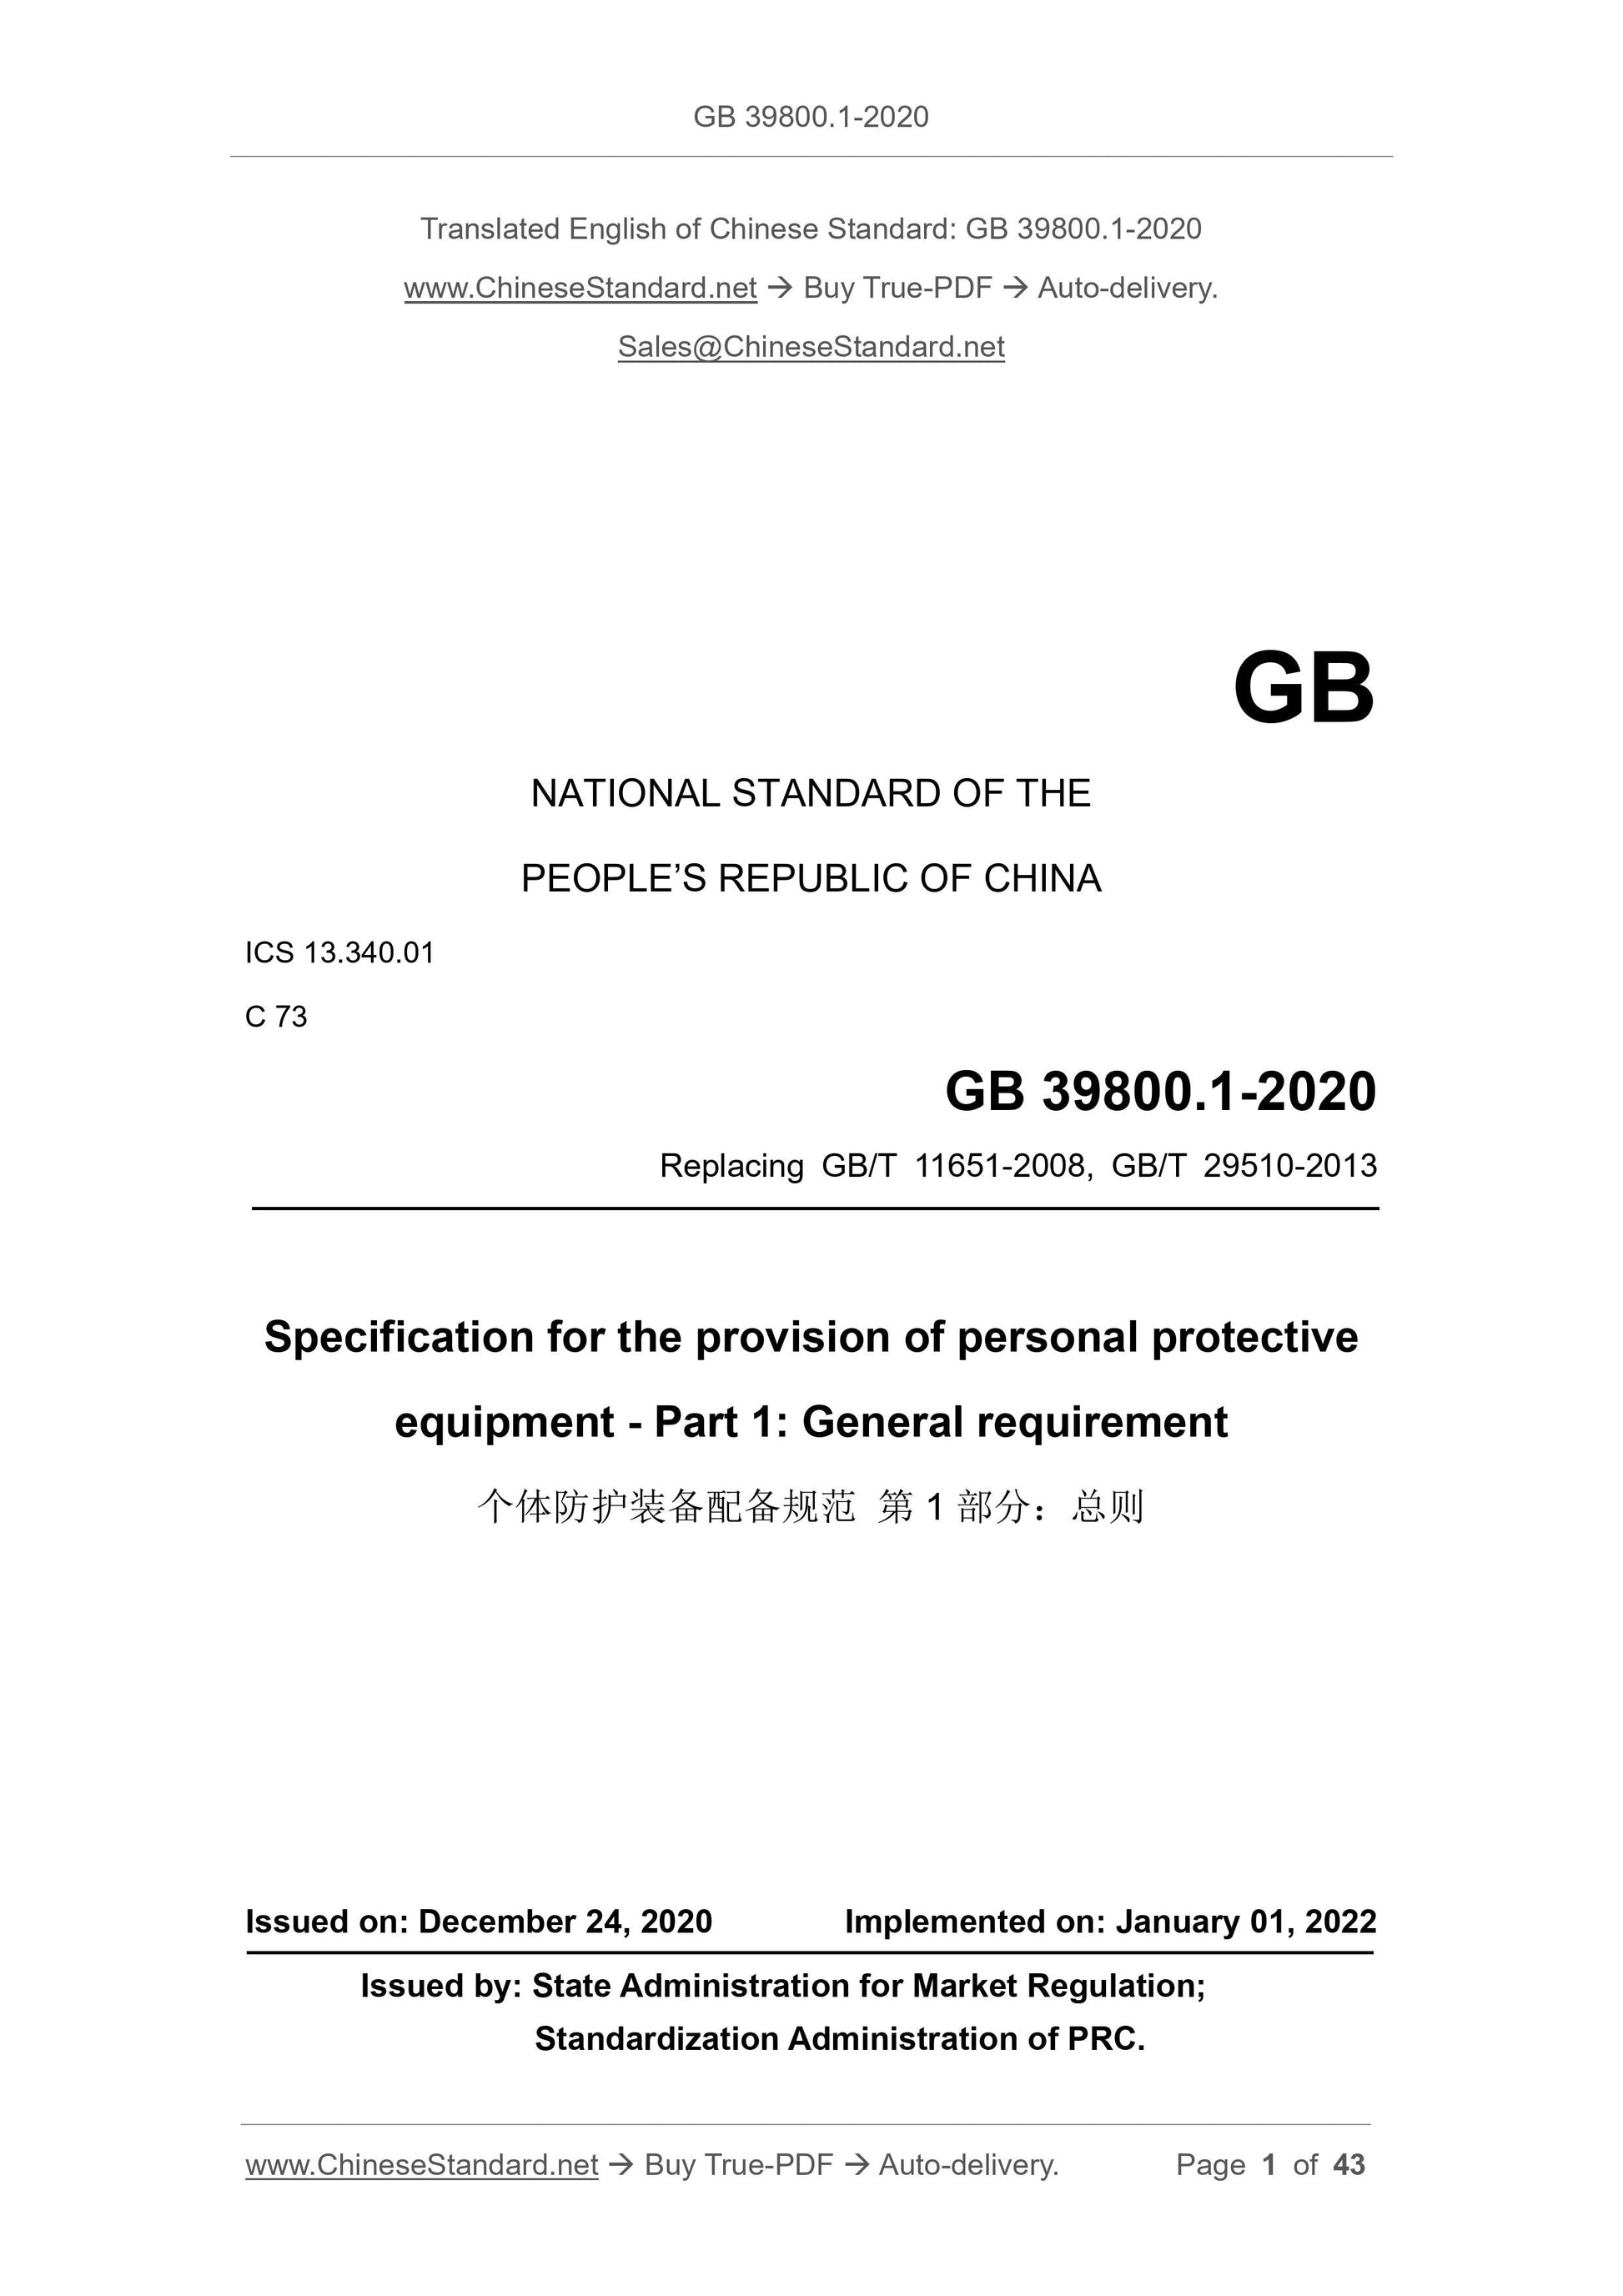 GB 39800.1-2020 Page 1